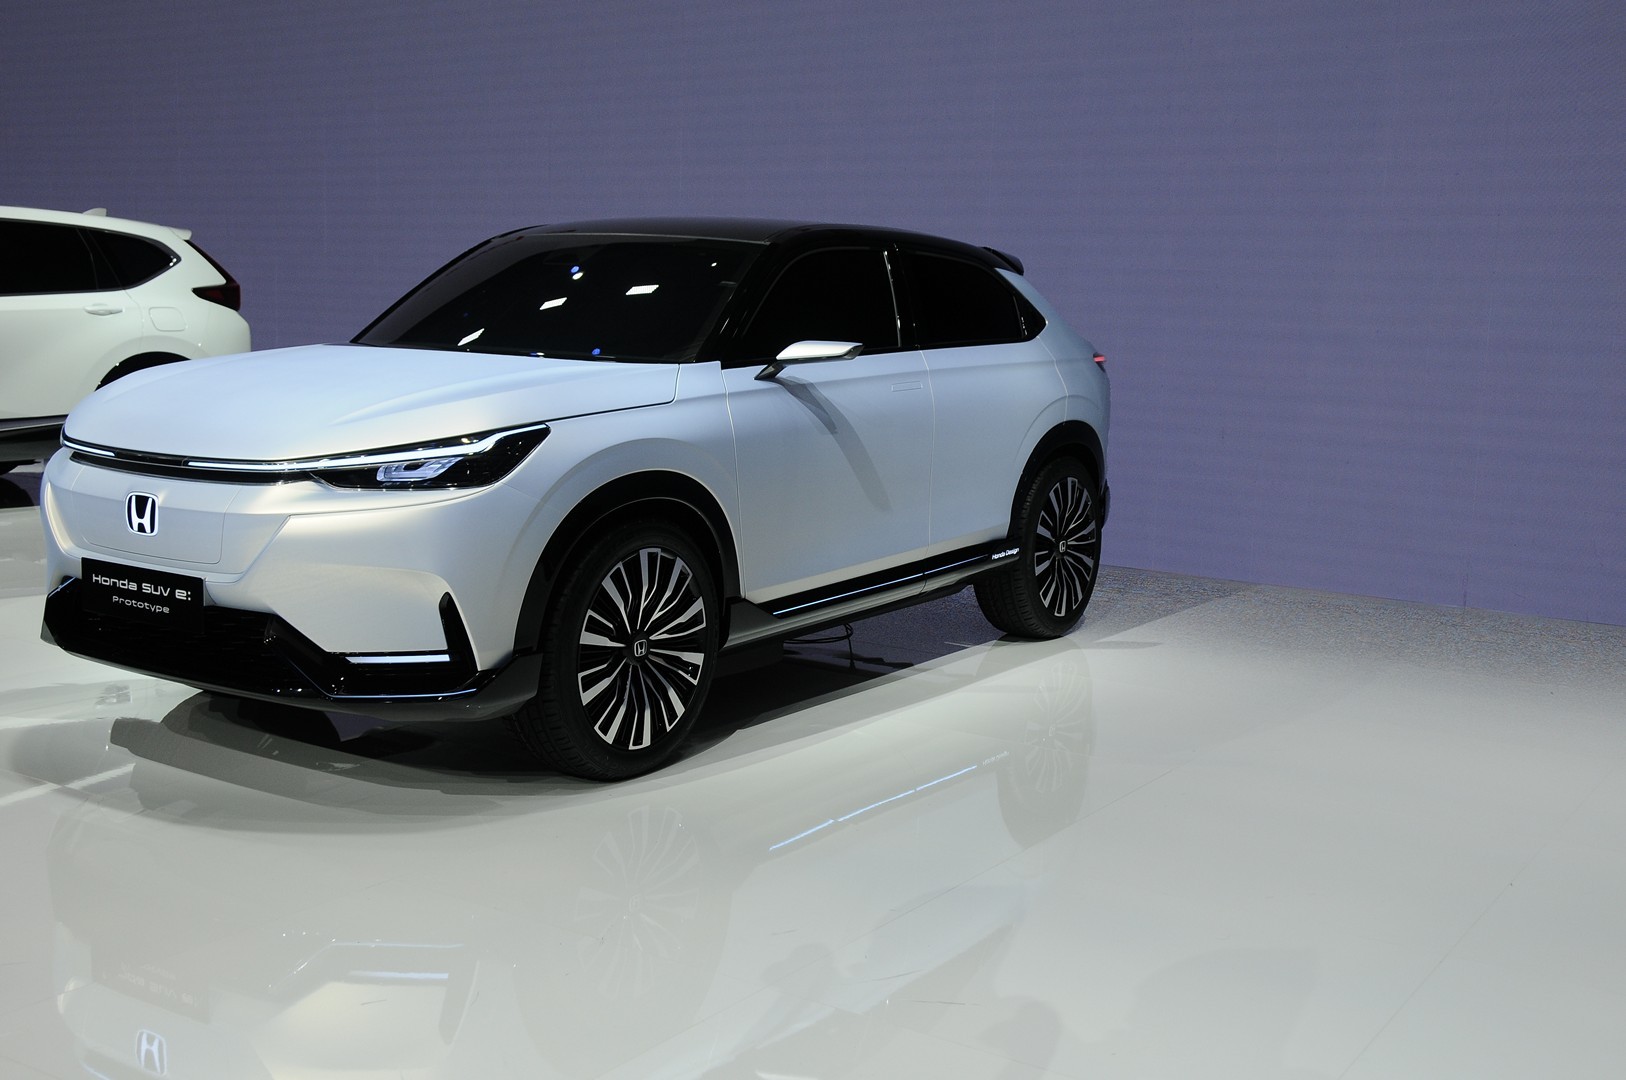 Honda Reveals Electric SUV Prototype in China, Looks Like the New HRV